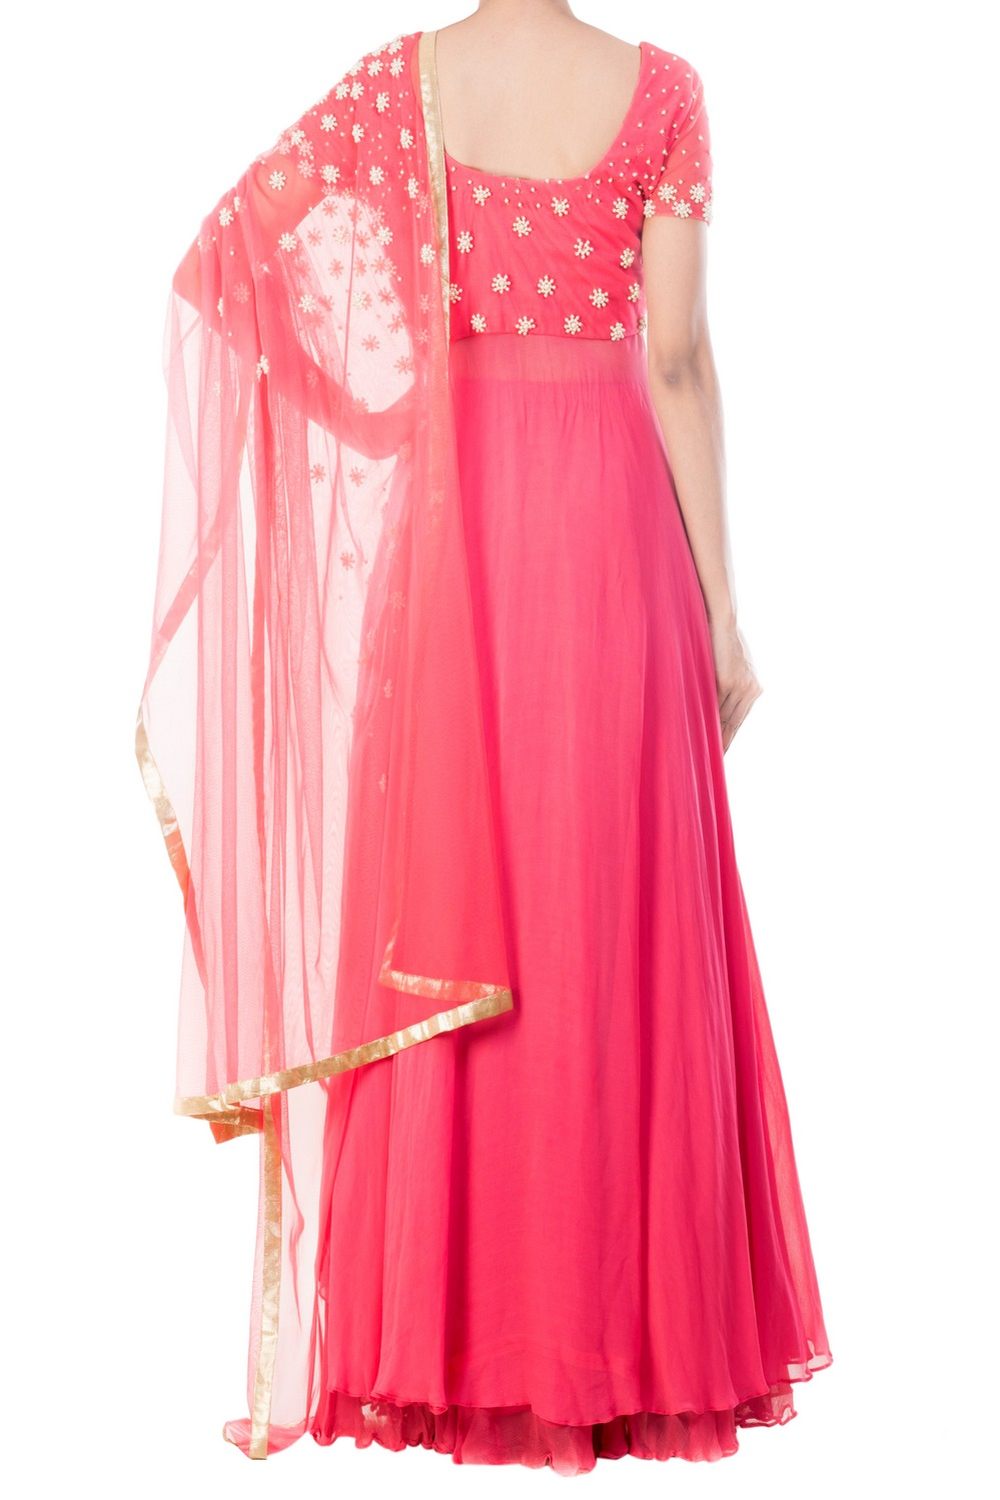 Strawberry Pink Embroidered Lehenga Set - Indian Clothing in Denver, CO, Aurora, CO, Boulder, CO, Fort Collins, CO, Colorado Springs, CO, Parker, CO, Highlands Ranch, CO, Cherry Creek, CO, Centennial, CO, and Longmont, CO. Nationwide shipping USA - India Fashion X